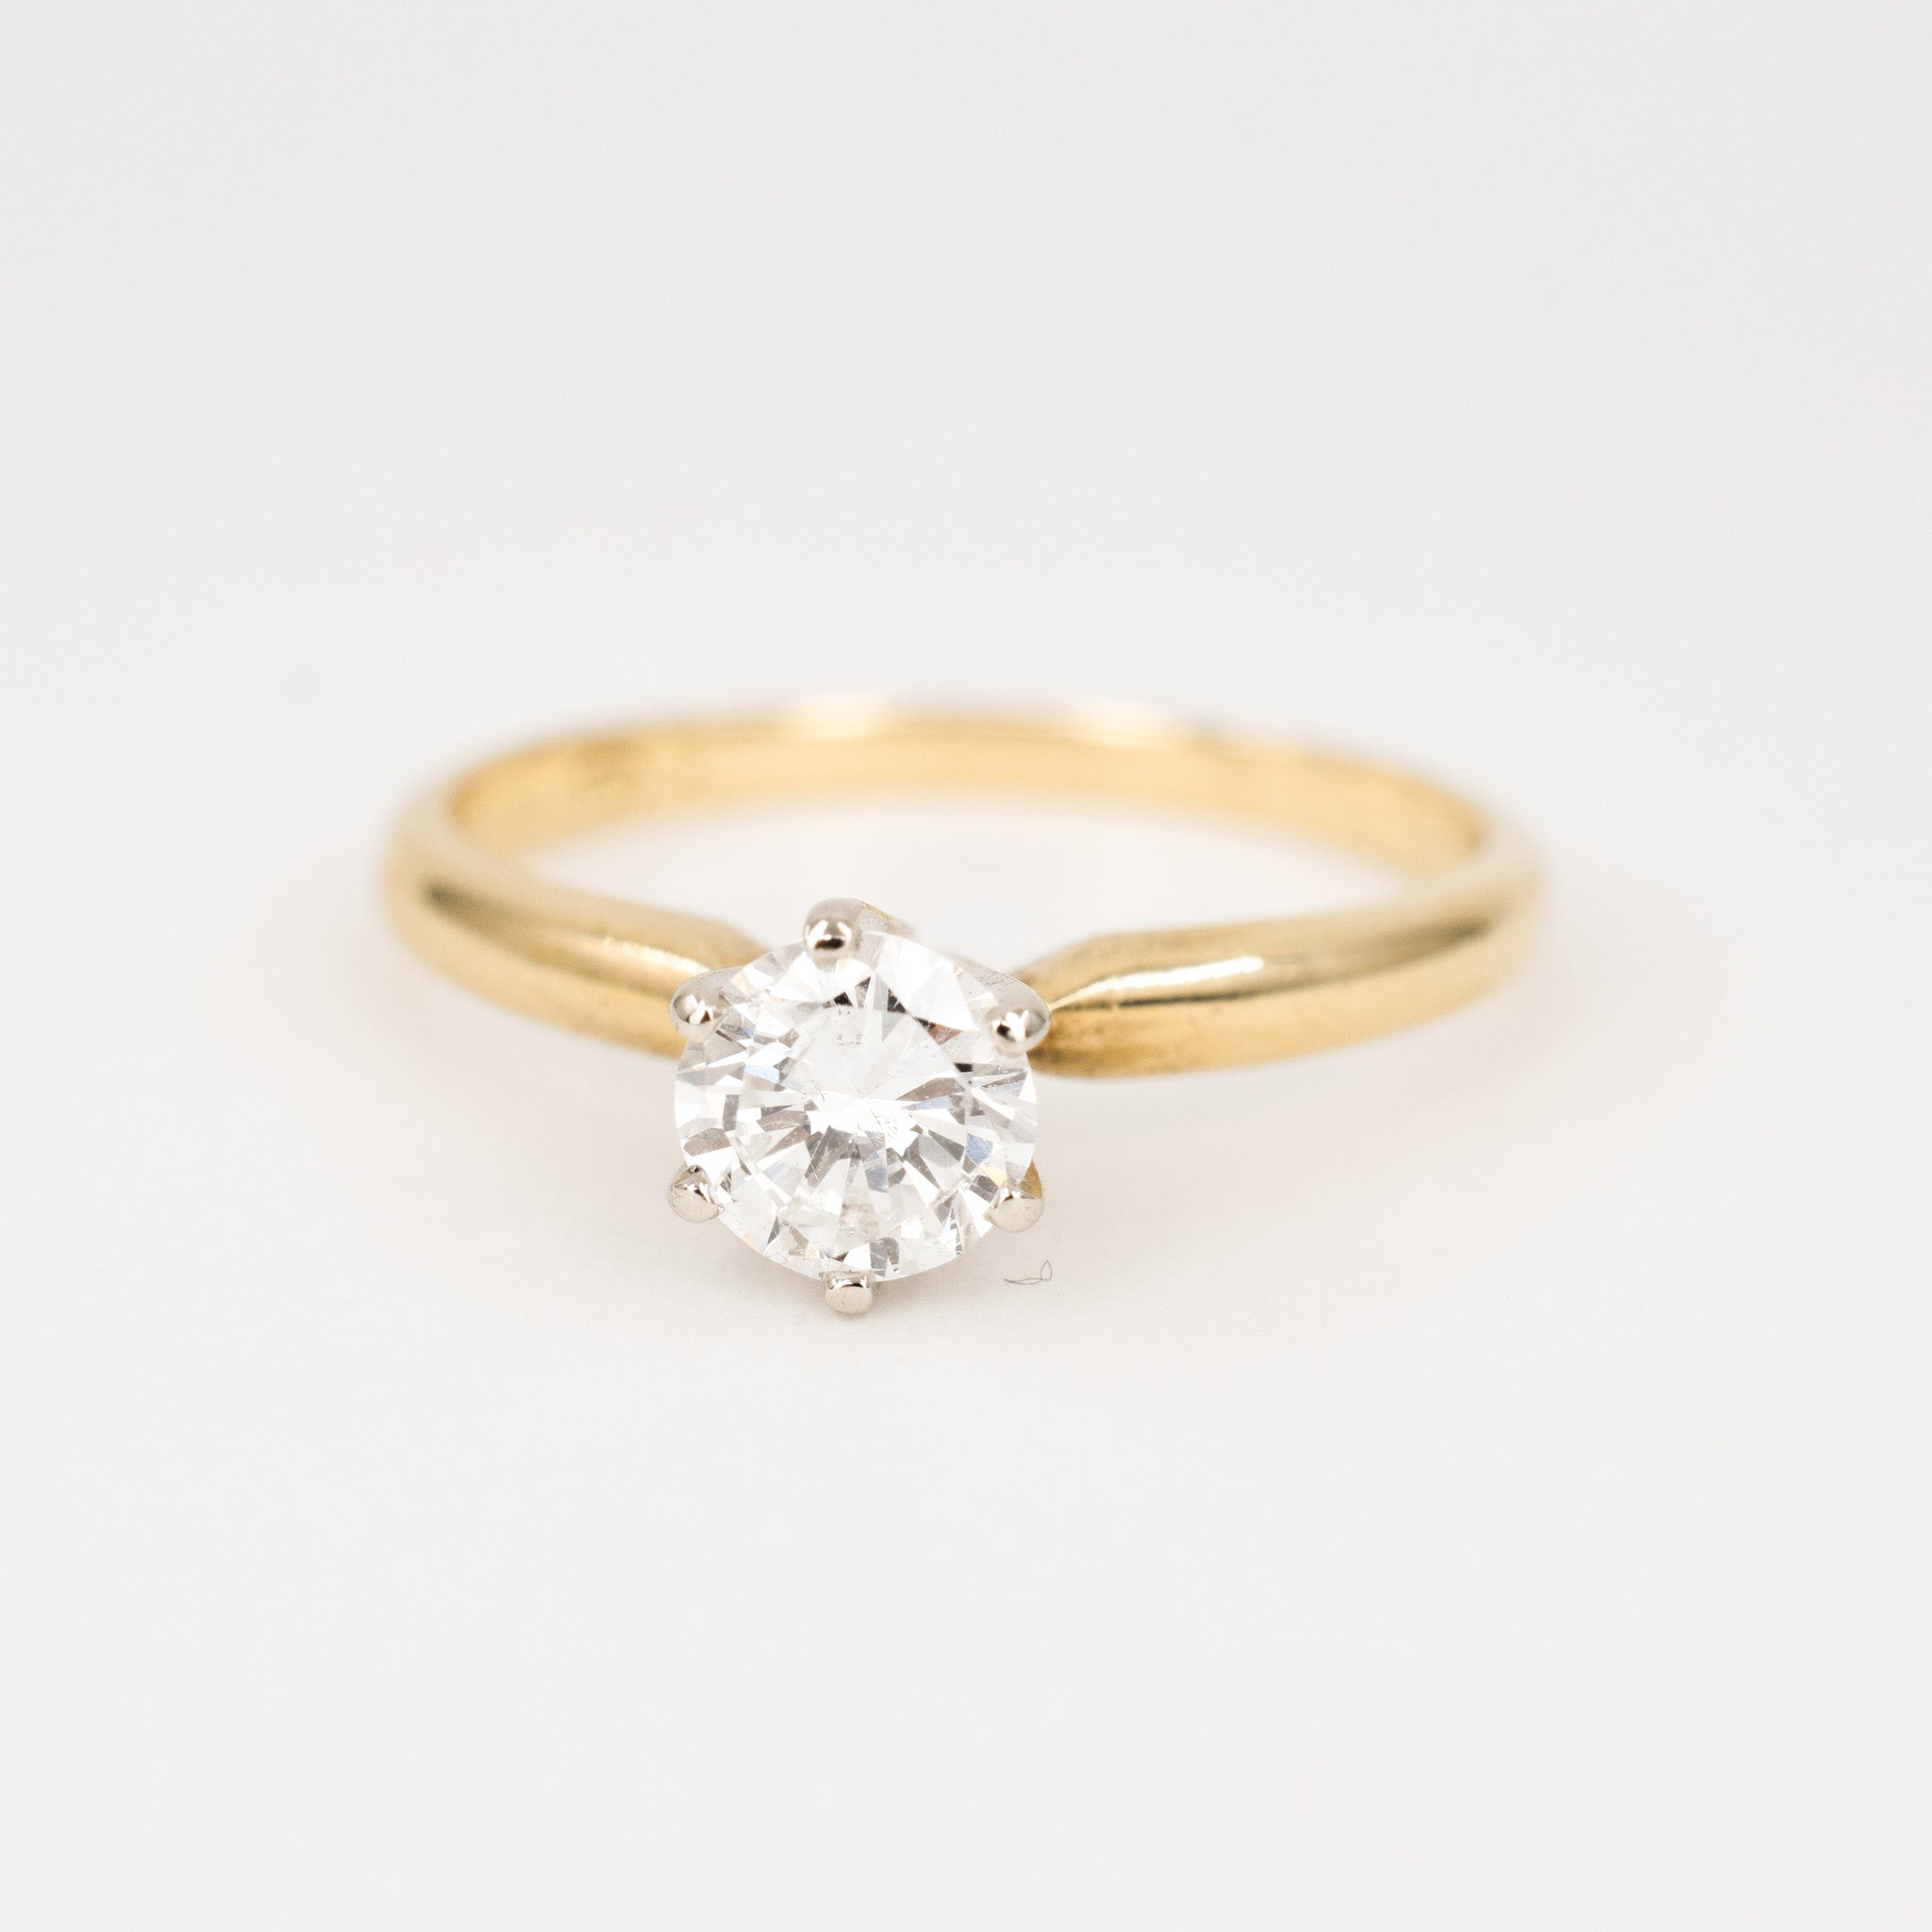 vintage solitaire diamond engagement ring, folklor vintage jewelry canada